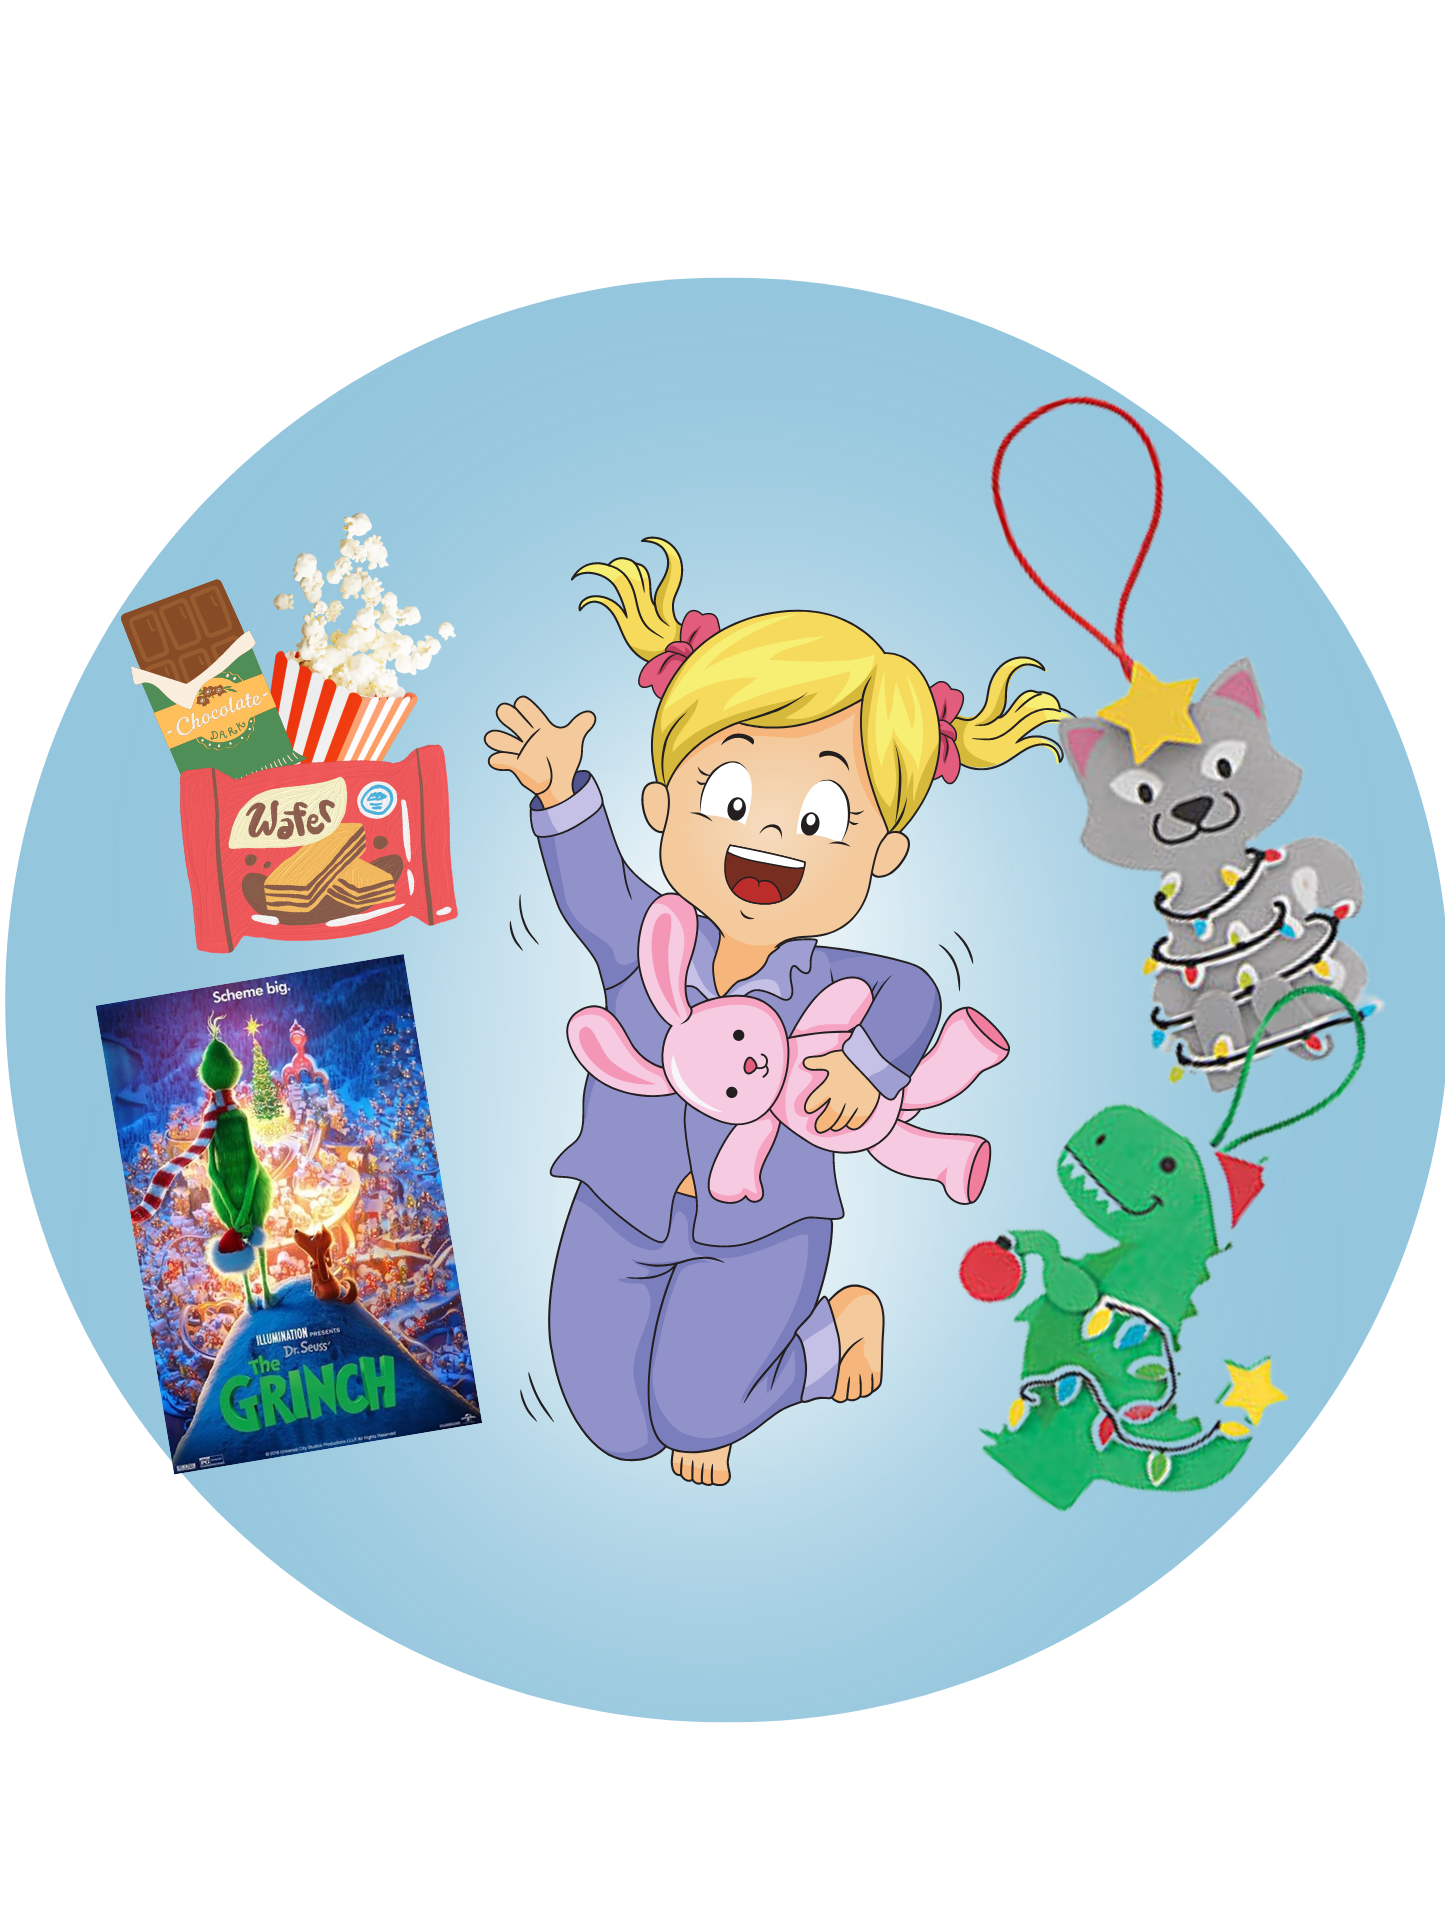 Little Girl Happily Jumping Surrounded by Candy, Ornaments and Film